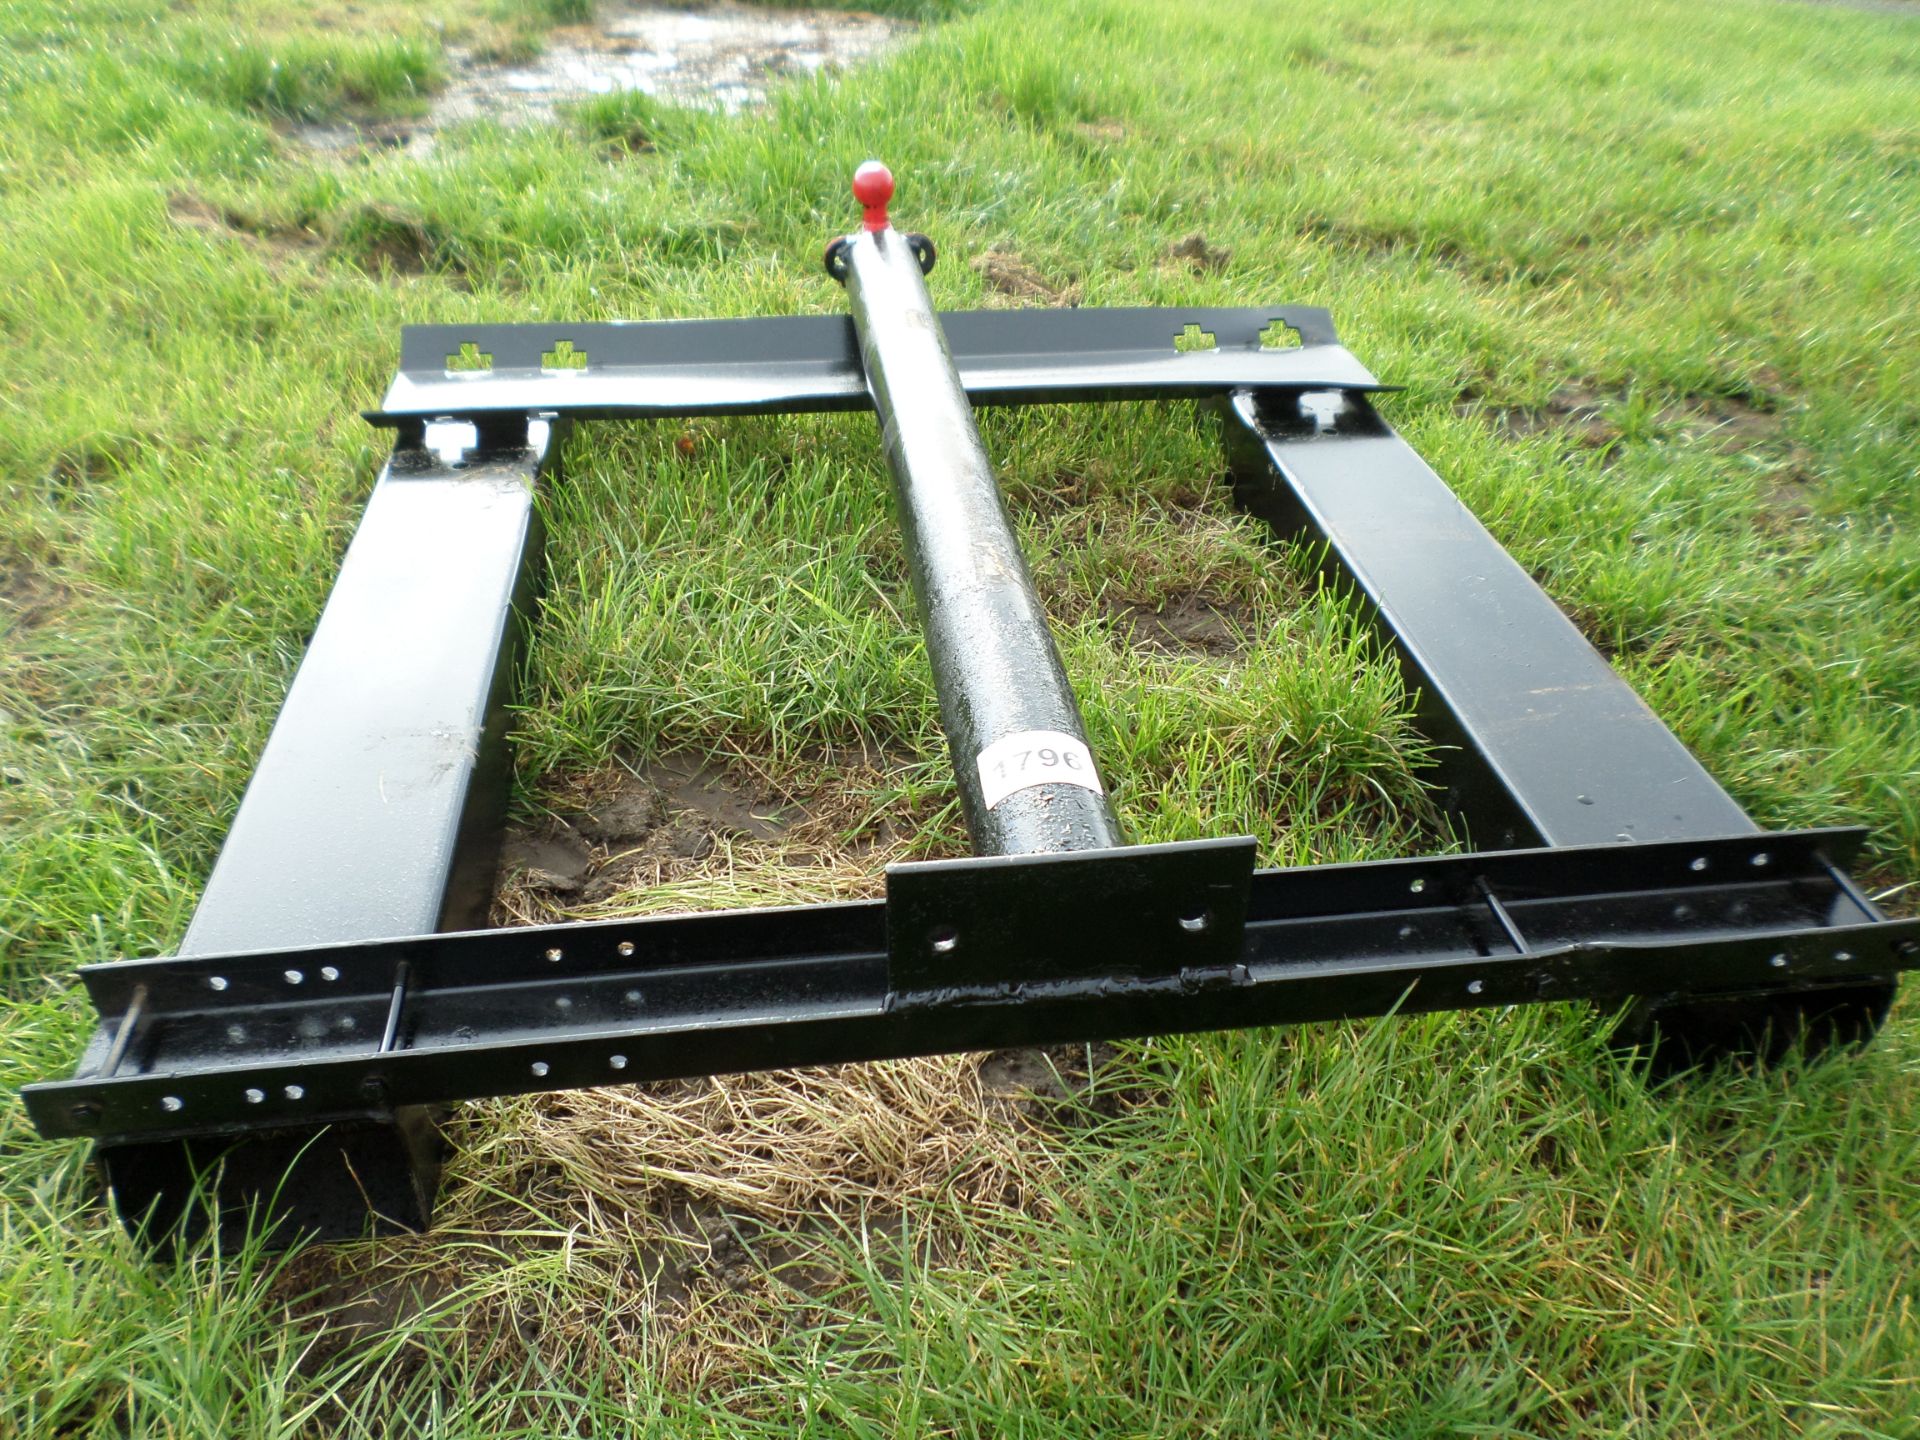 Forklift attachment for moving trailers etc